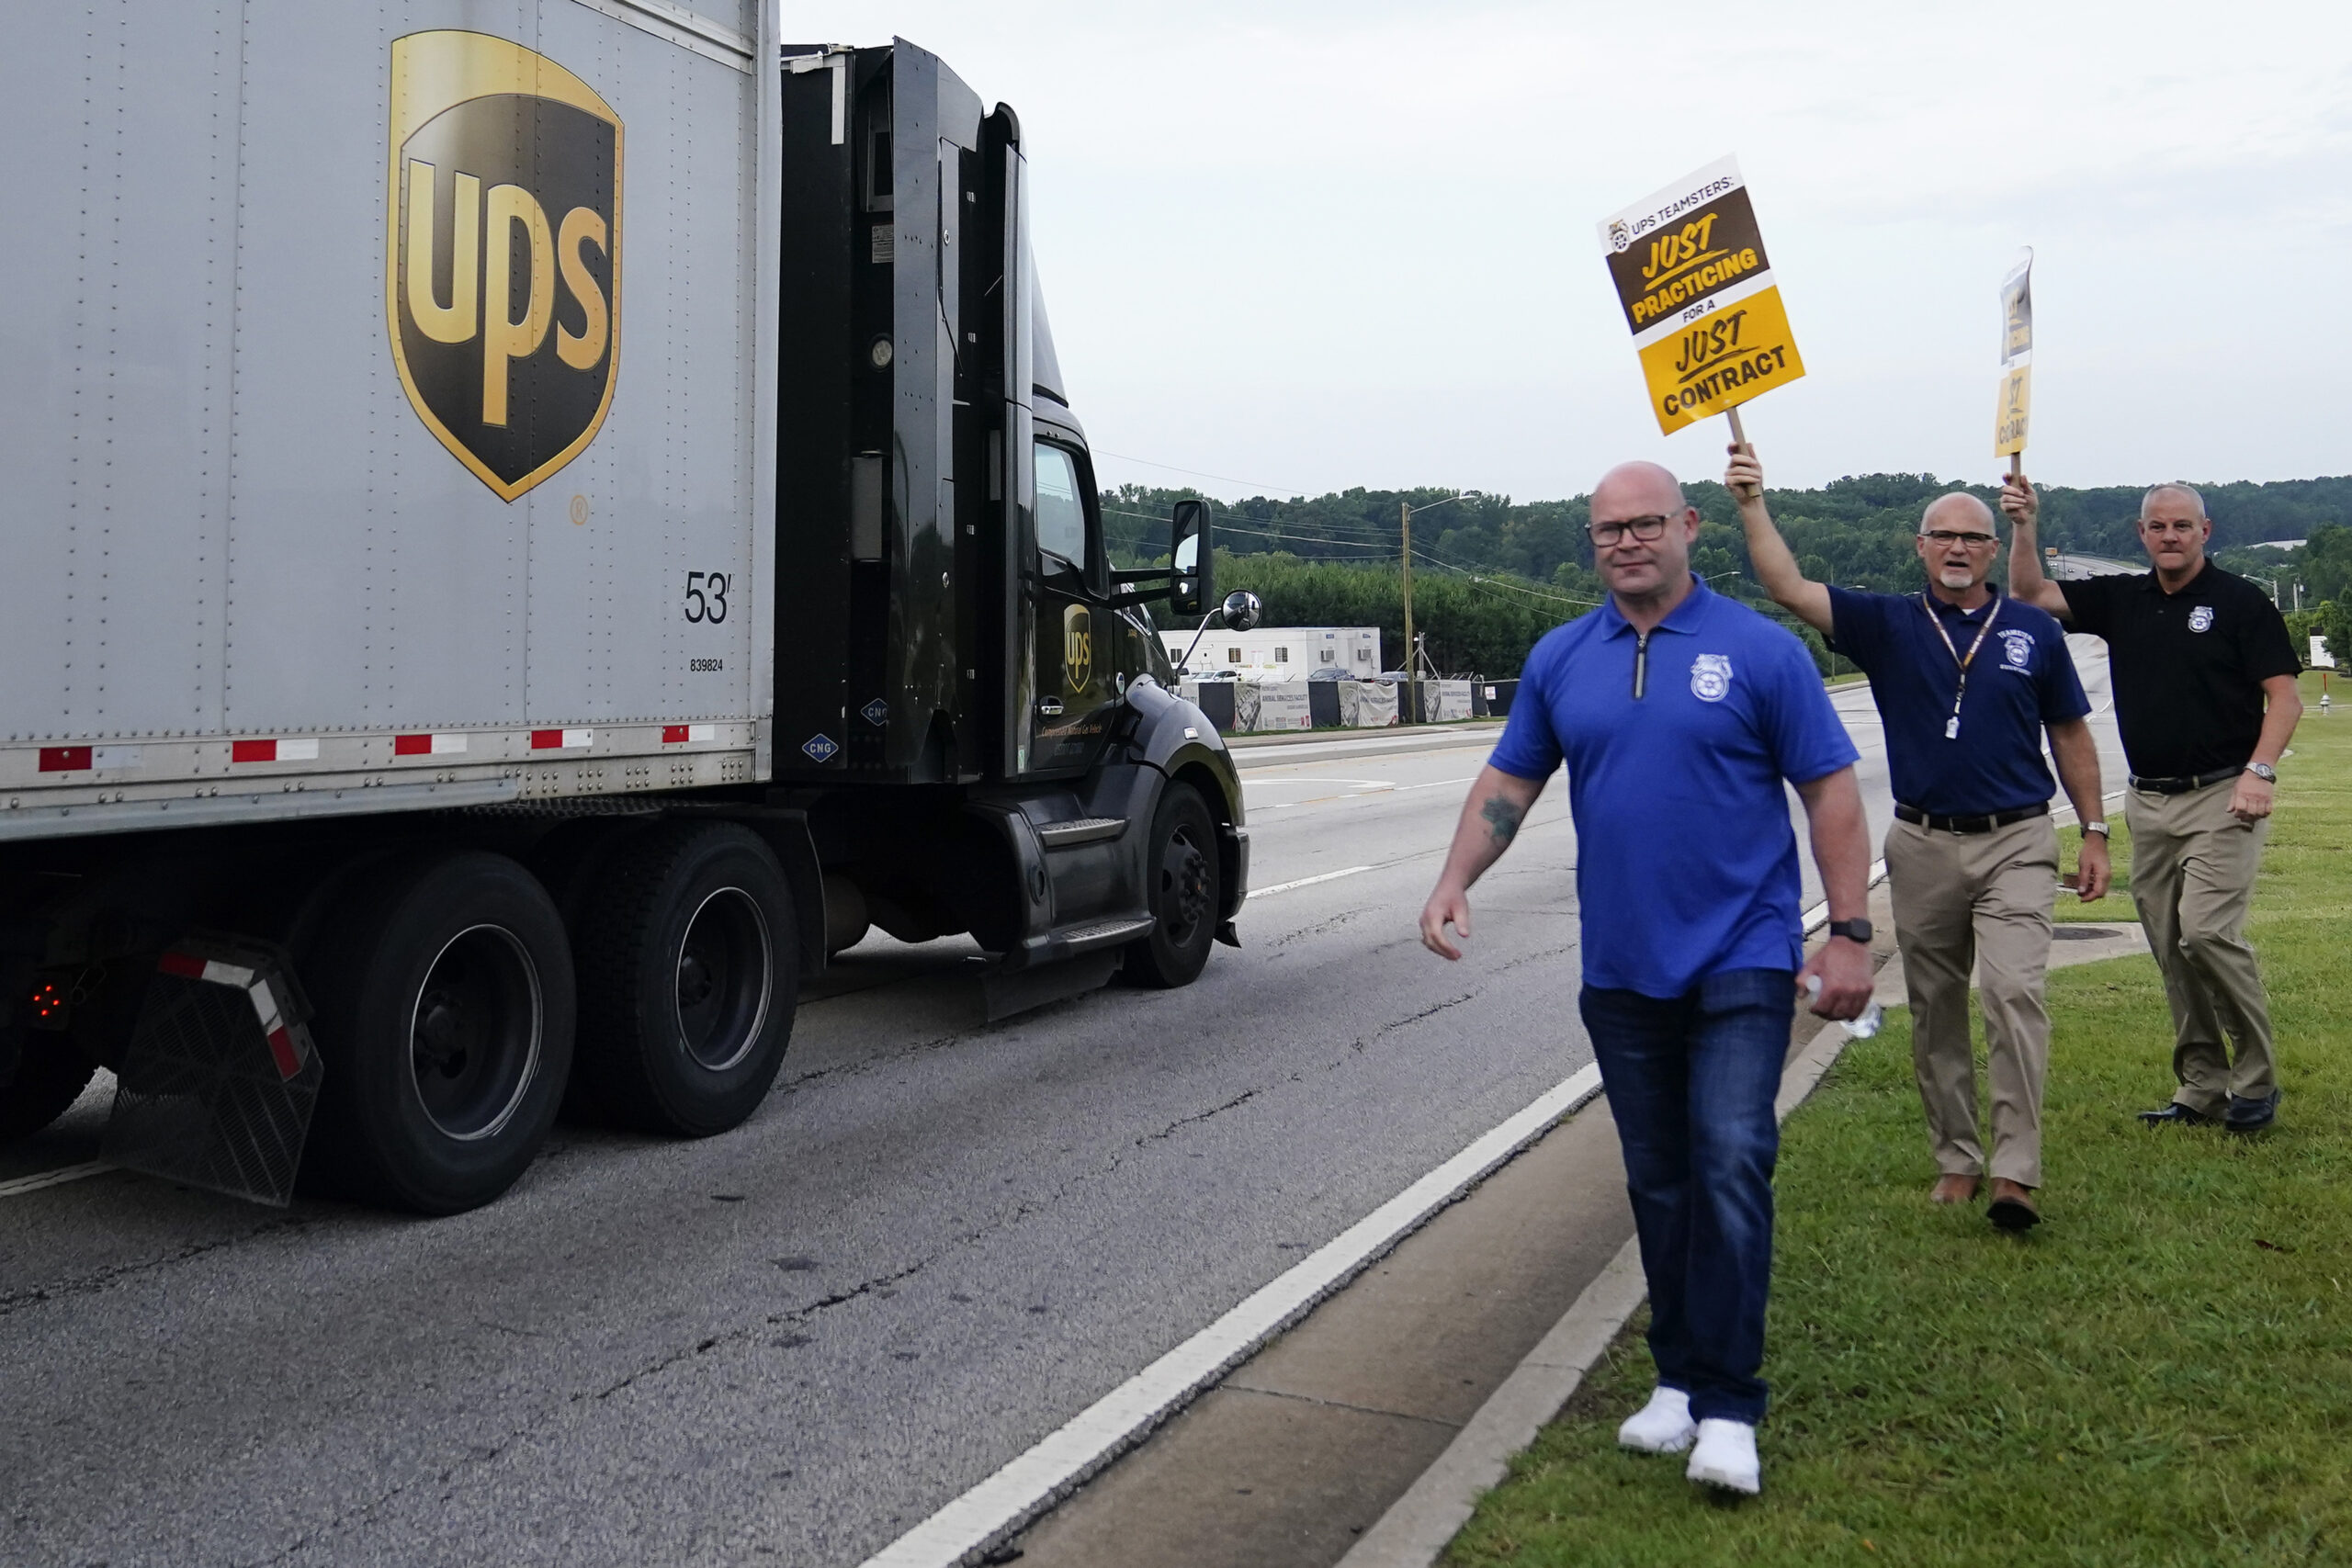 UPS asks for exemption on new driver training regulations that may hurt its  ability to hire drivers - Atlanta Business Chronicle